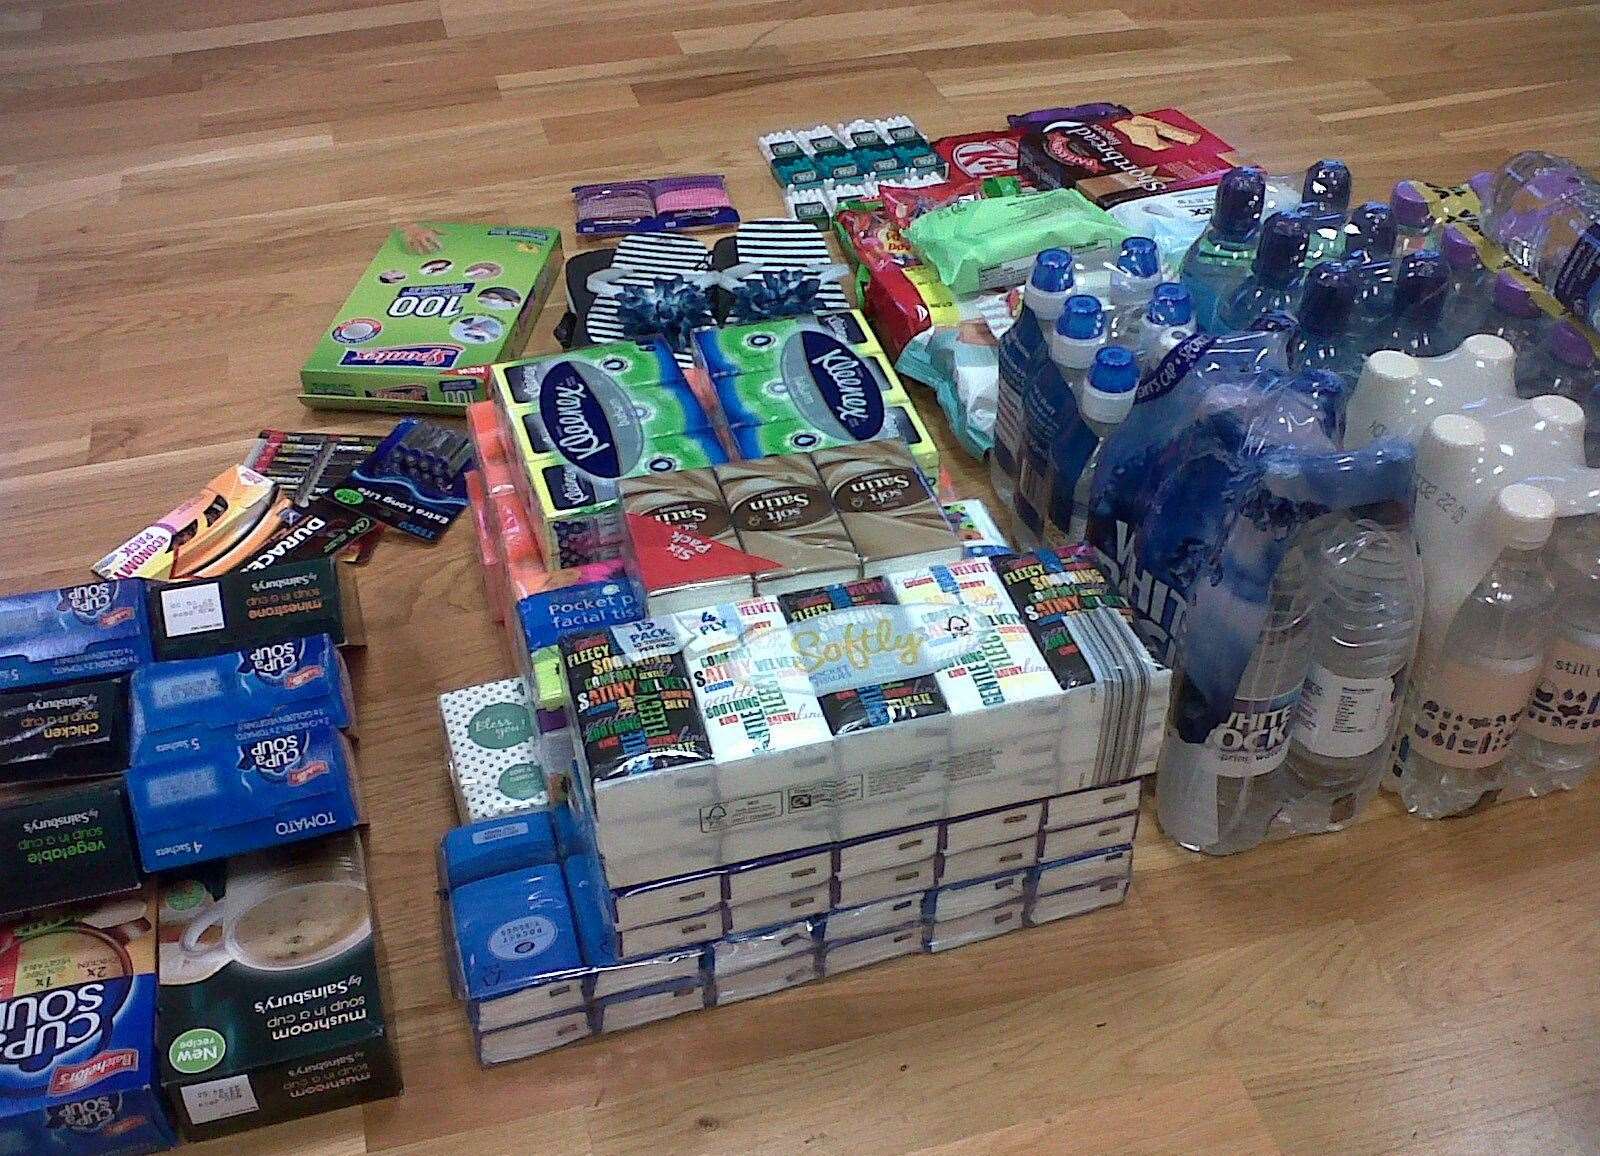 Some of the supplies given out by the pastors in Ramsgate. Picture: Community Pastors